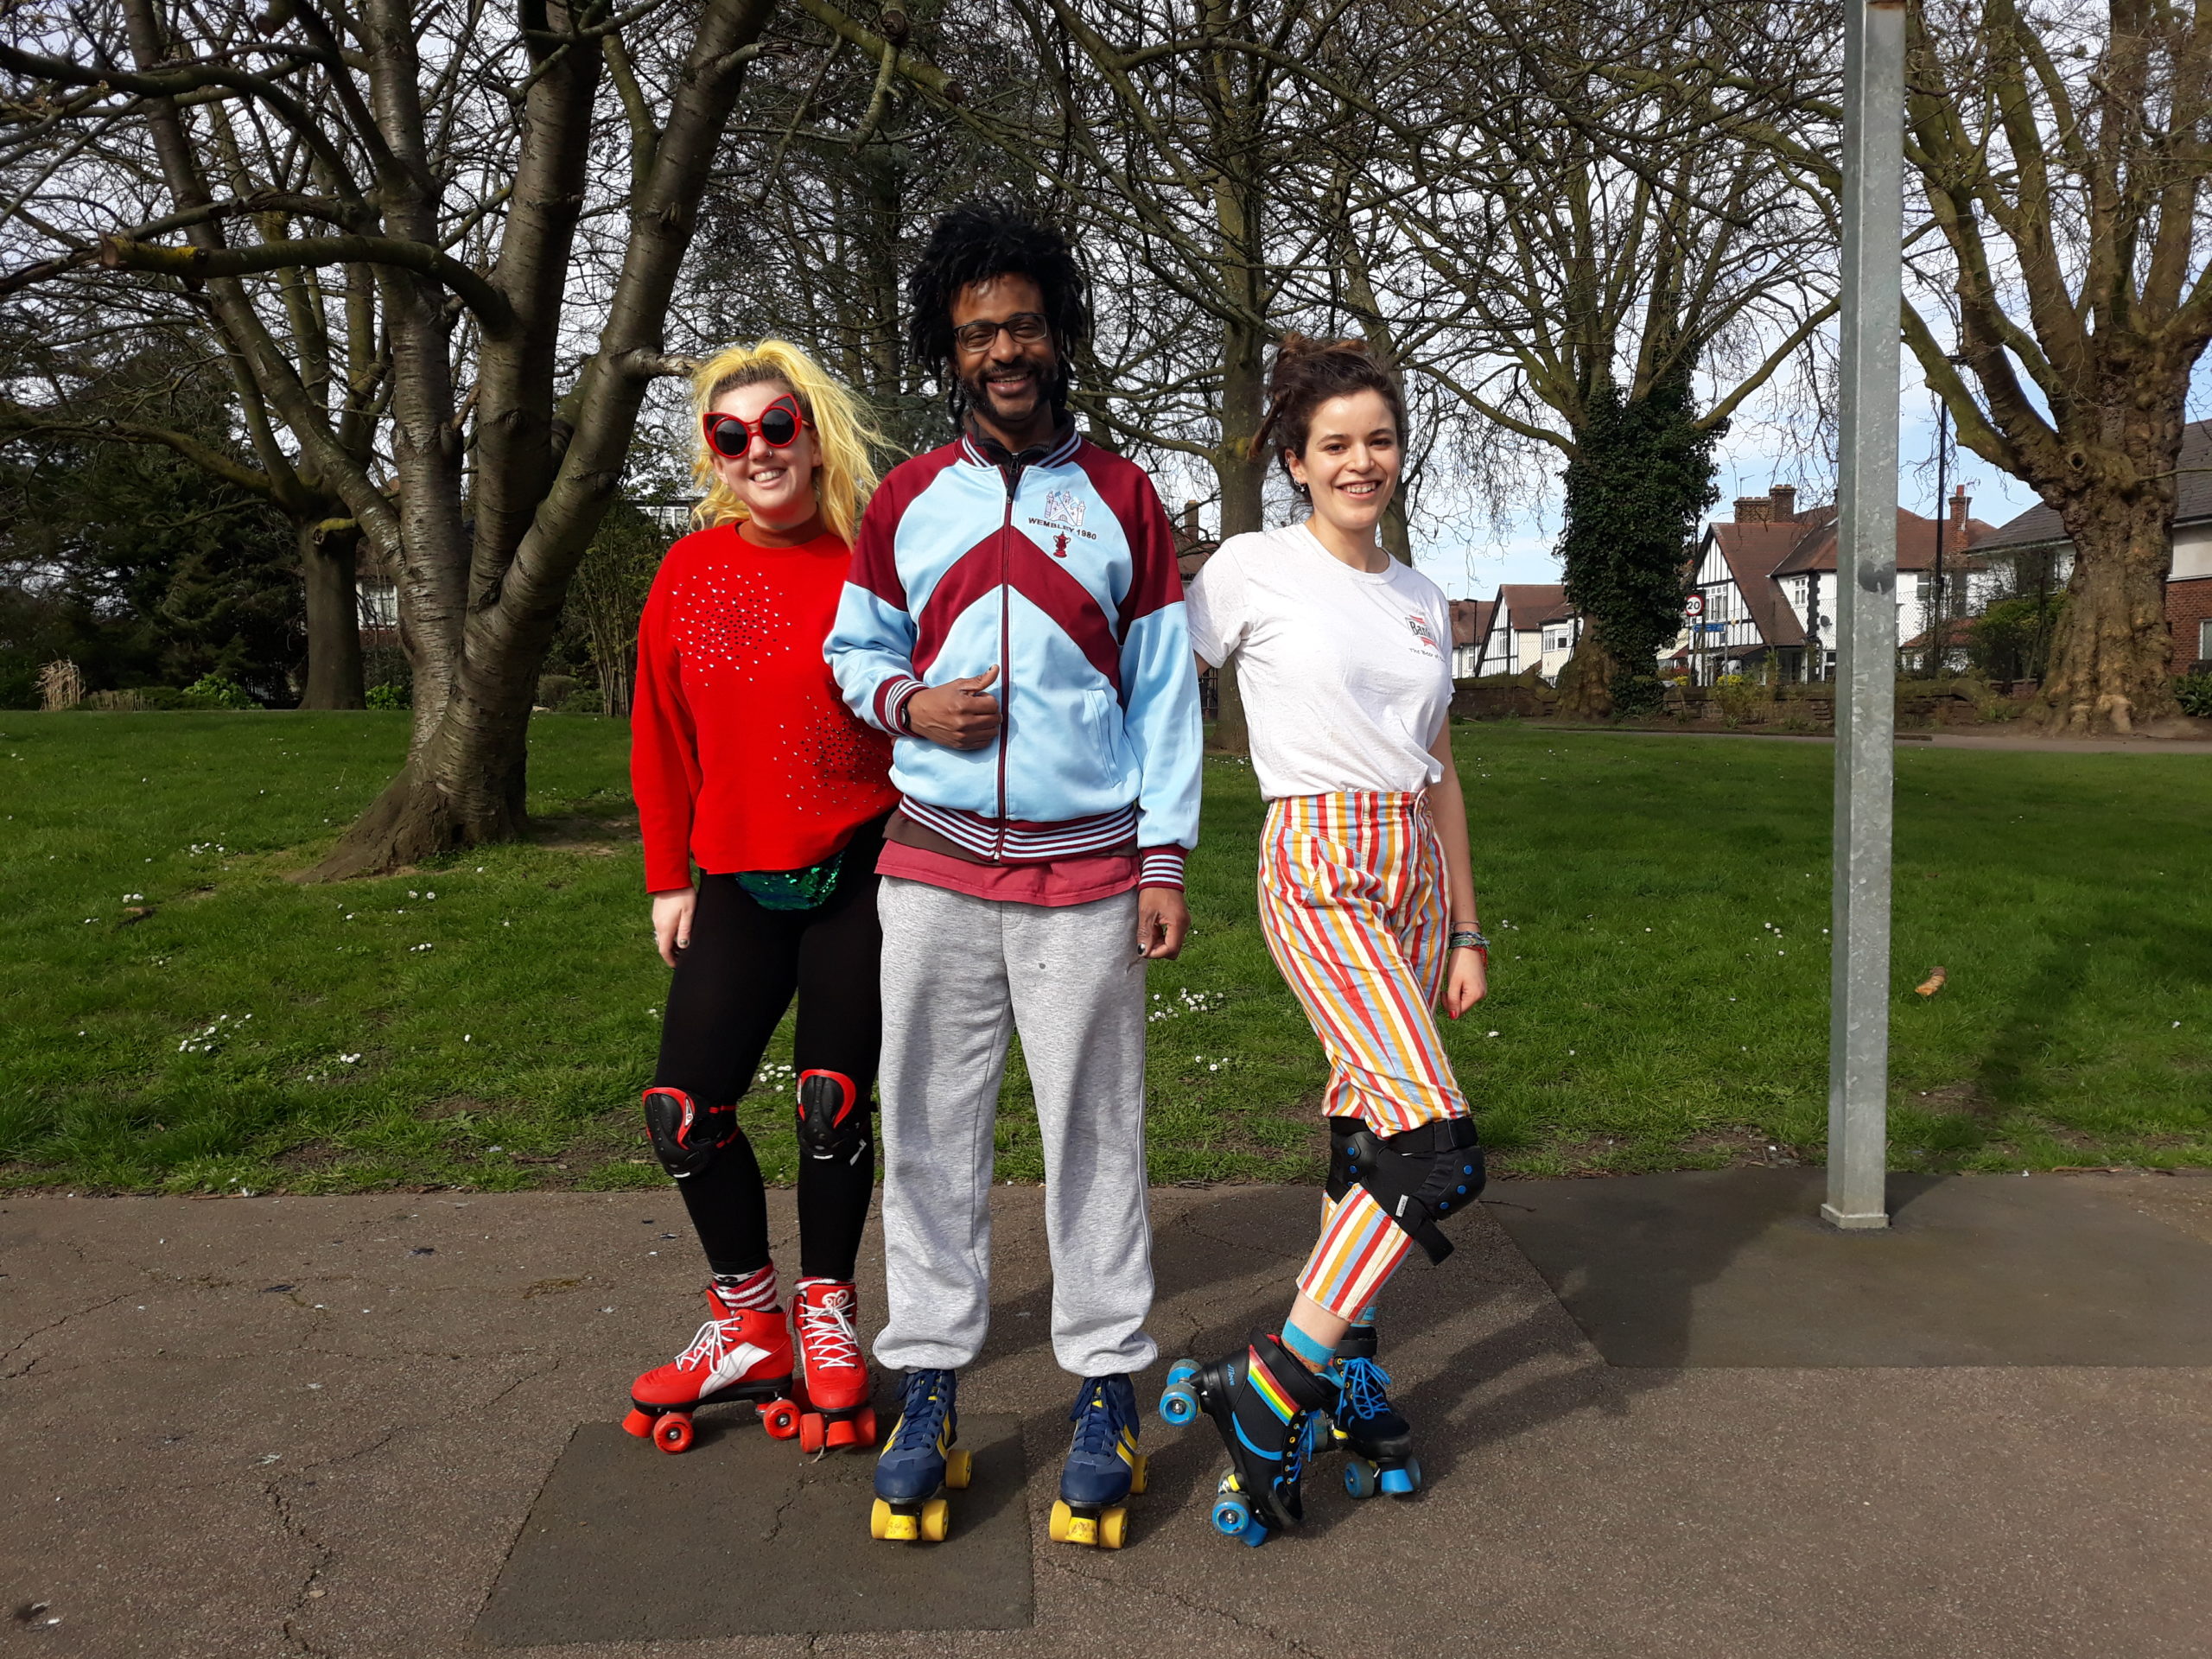 Three friends rollerskating in the park